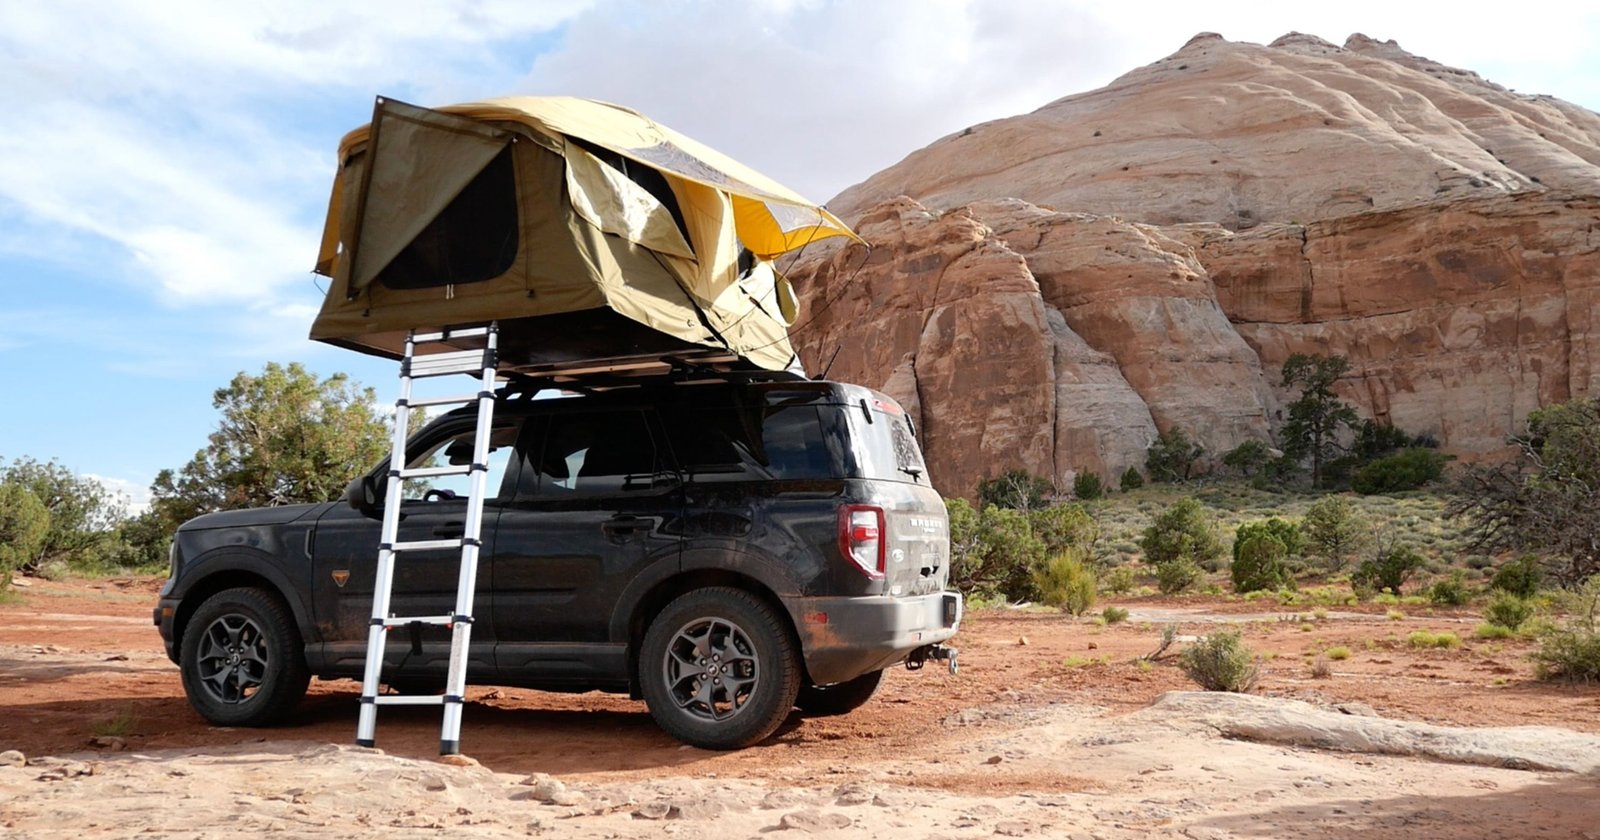 Why Are Rooftop Tents So Expensive